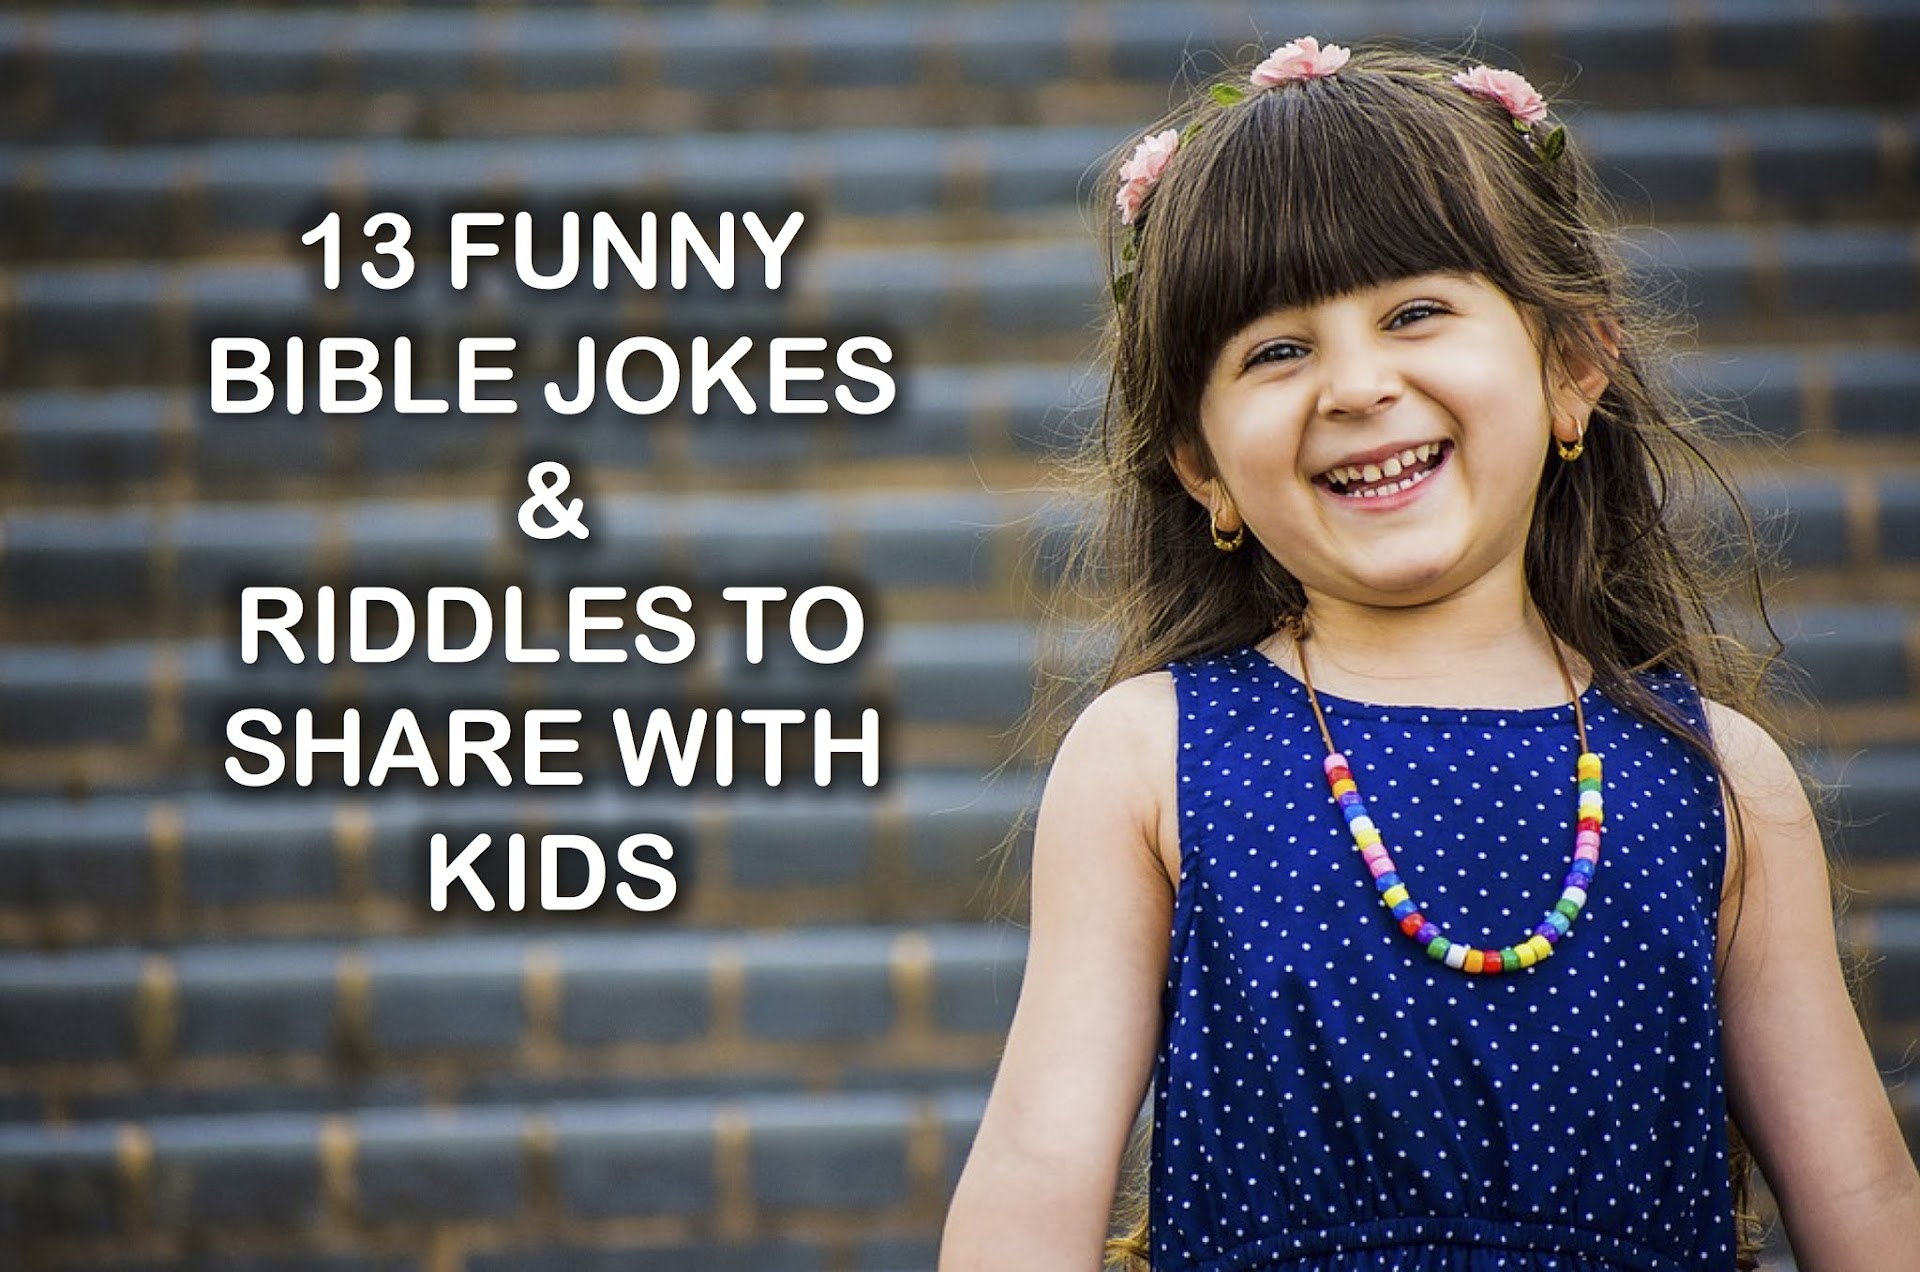 13 Funny Bible Jokes & Riddles to Share with Kids ~ RELEVANT CHILDREN'S  MINISTRY